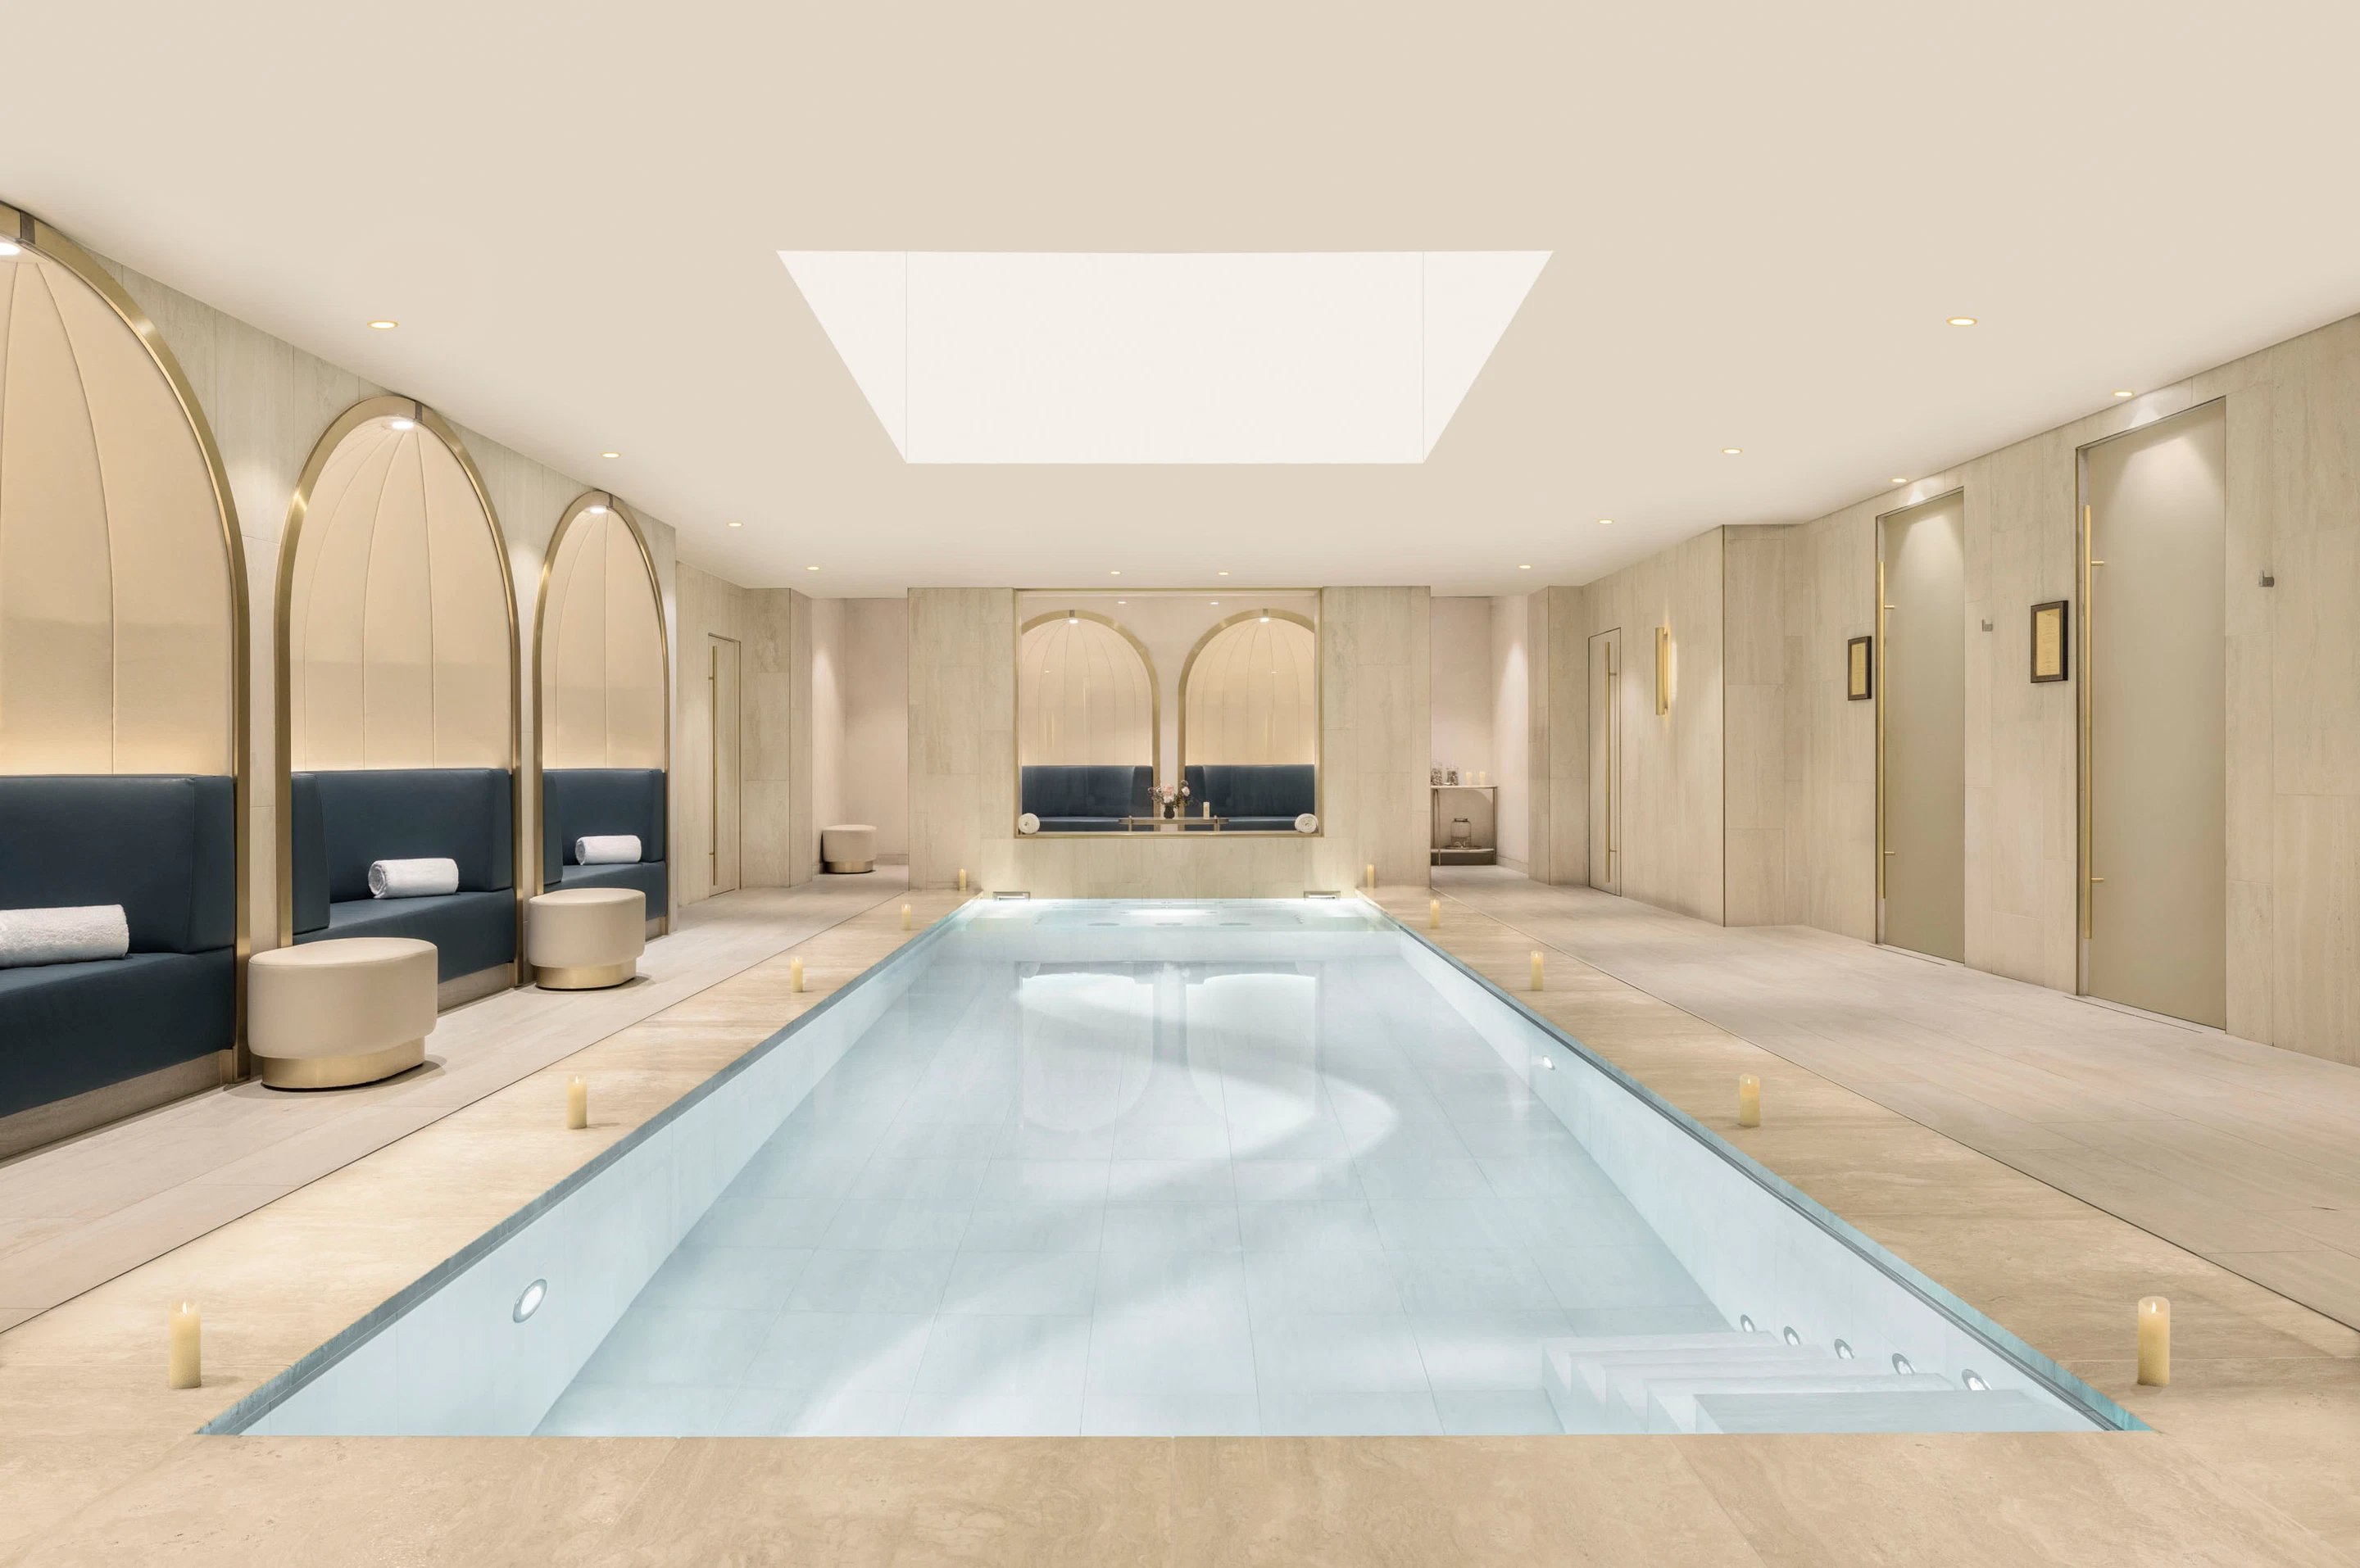 Maison Albar Hotels Le Pont-Neuf Spa Pont-Neuf by Cinq Mondes massage cabin for two